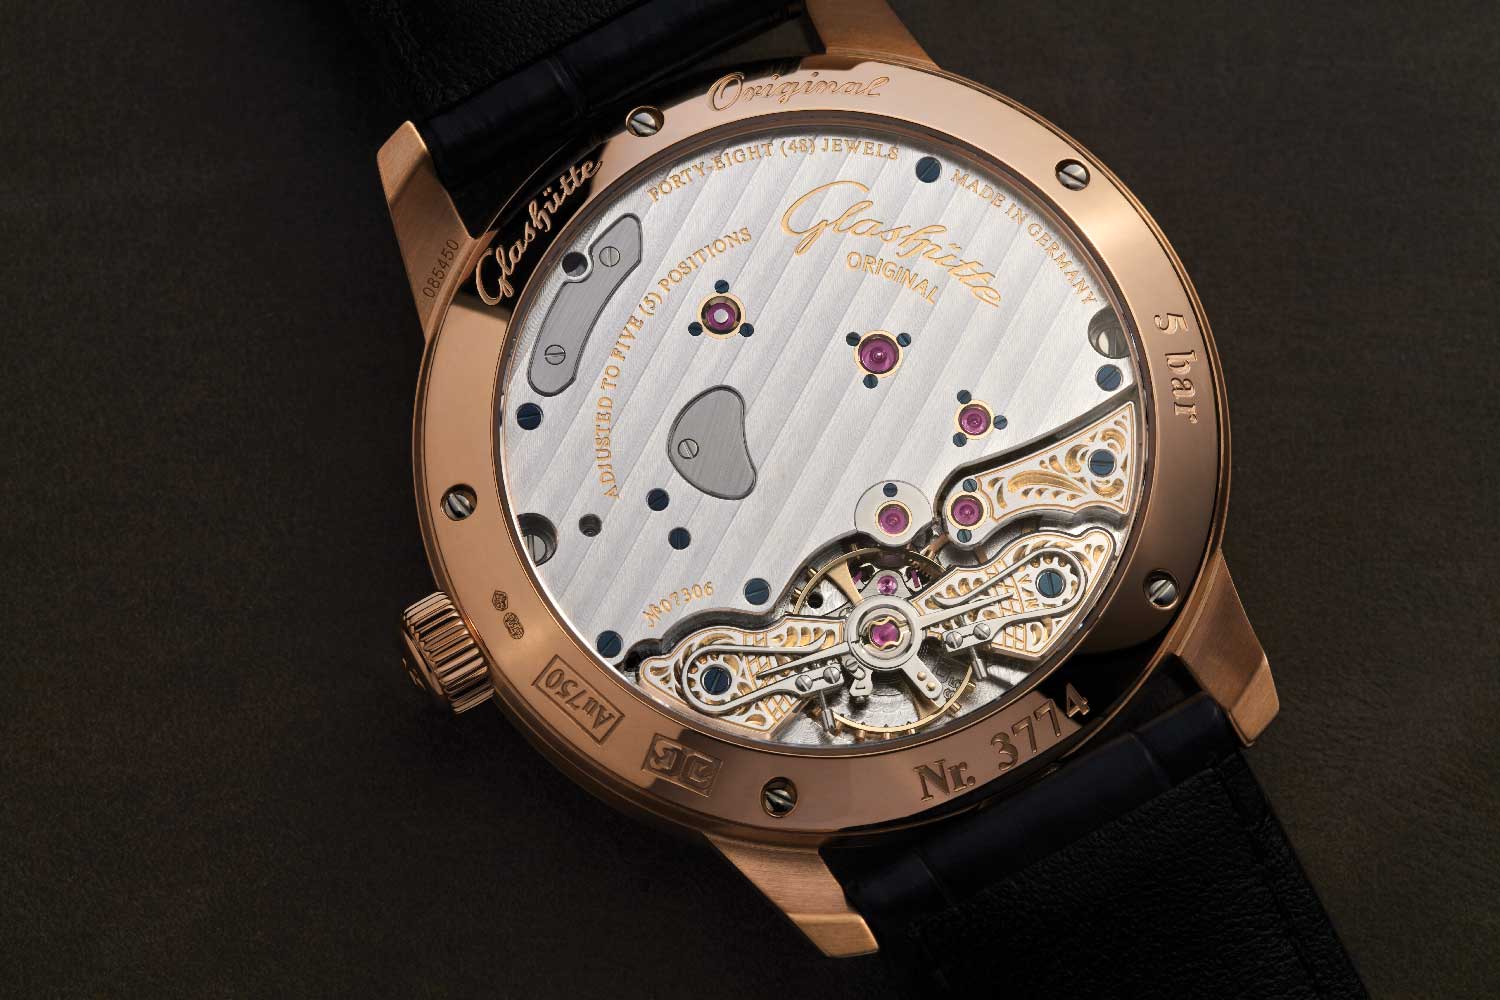 PanoReserve in red gold featuring a manual winding movement with balance bridge and second cock engraved by hand